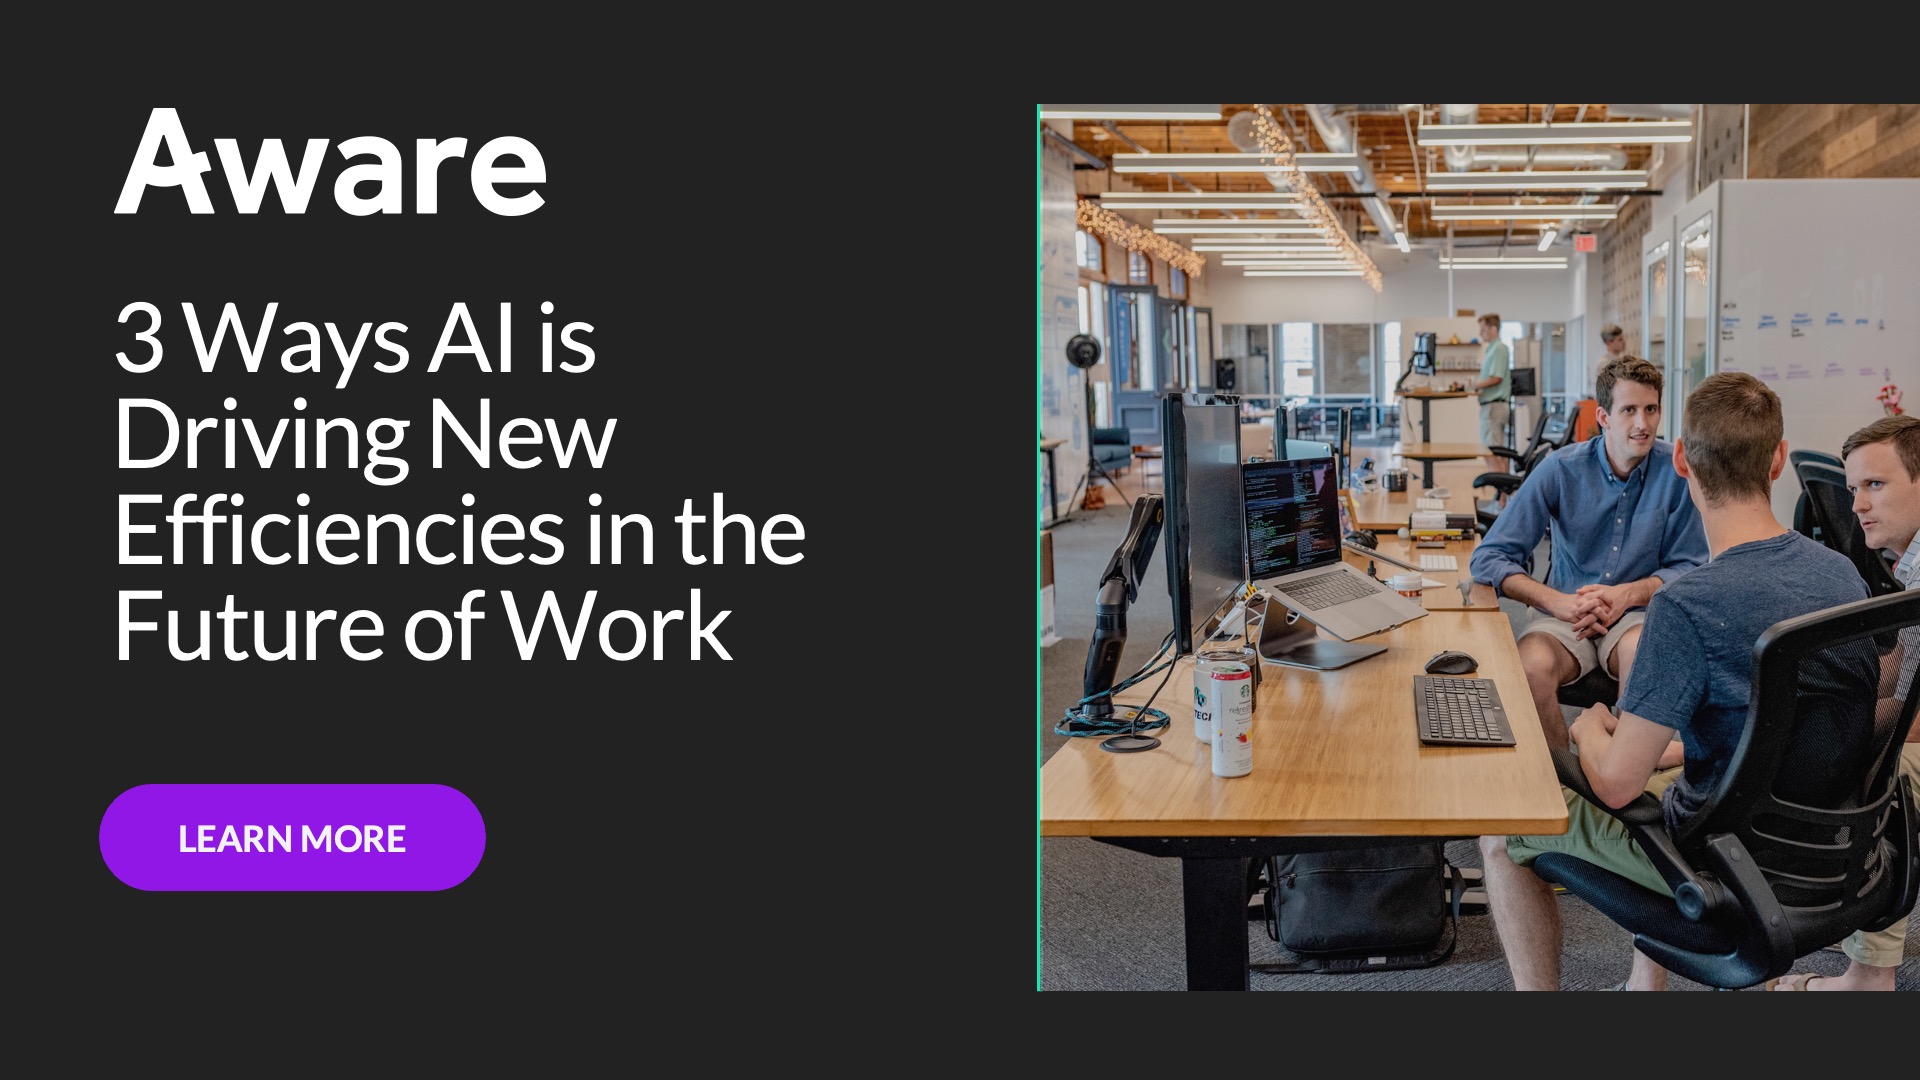 3 Ways AI is Driving New Efficiencies in the Future of Work